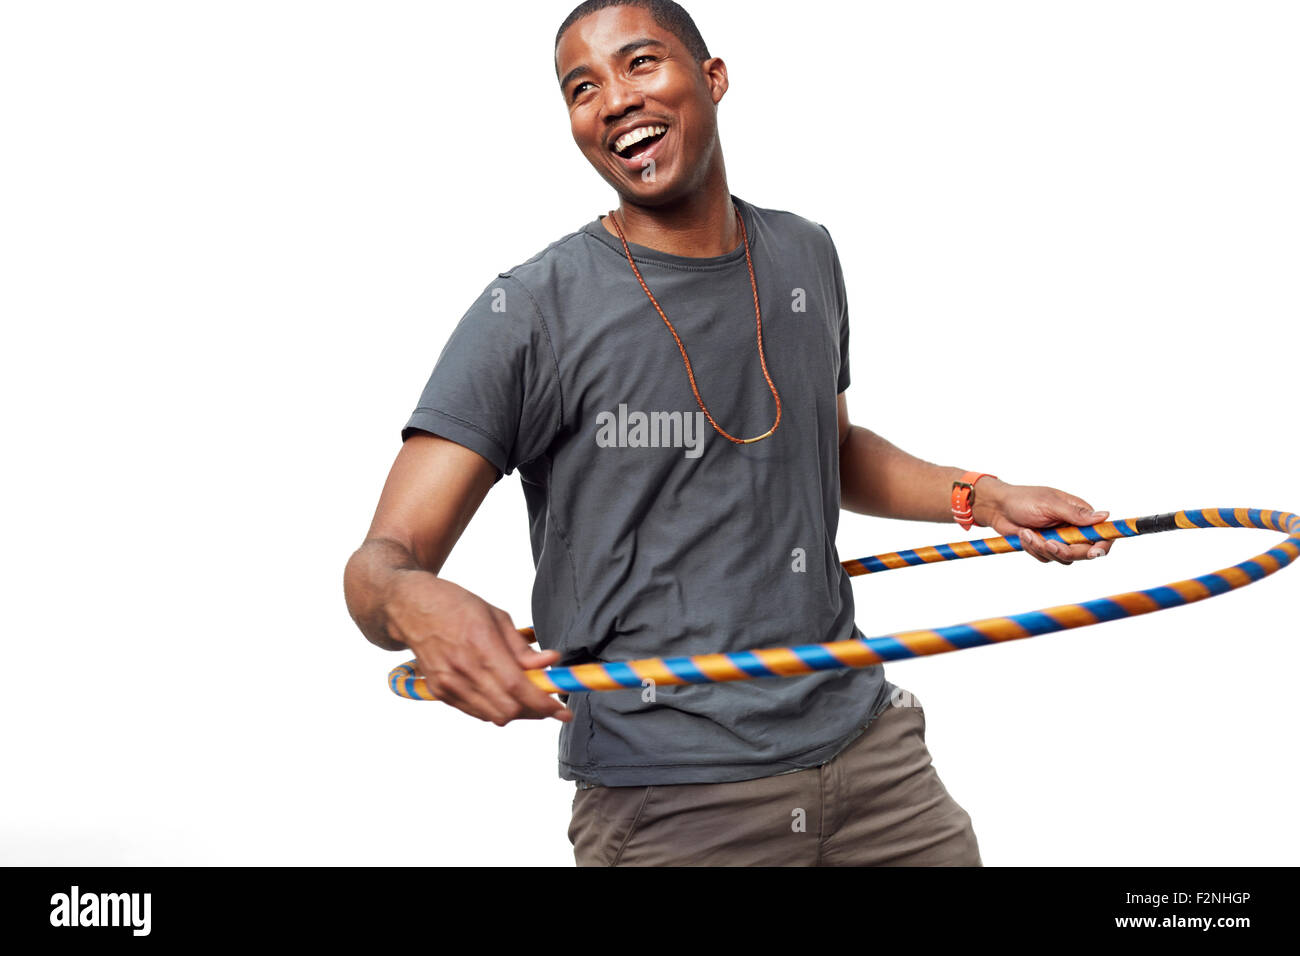 Smiling man playing with plastic hoop Stock Photo